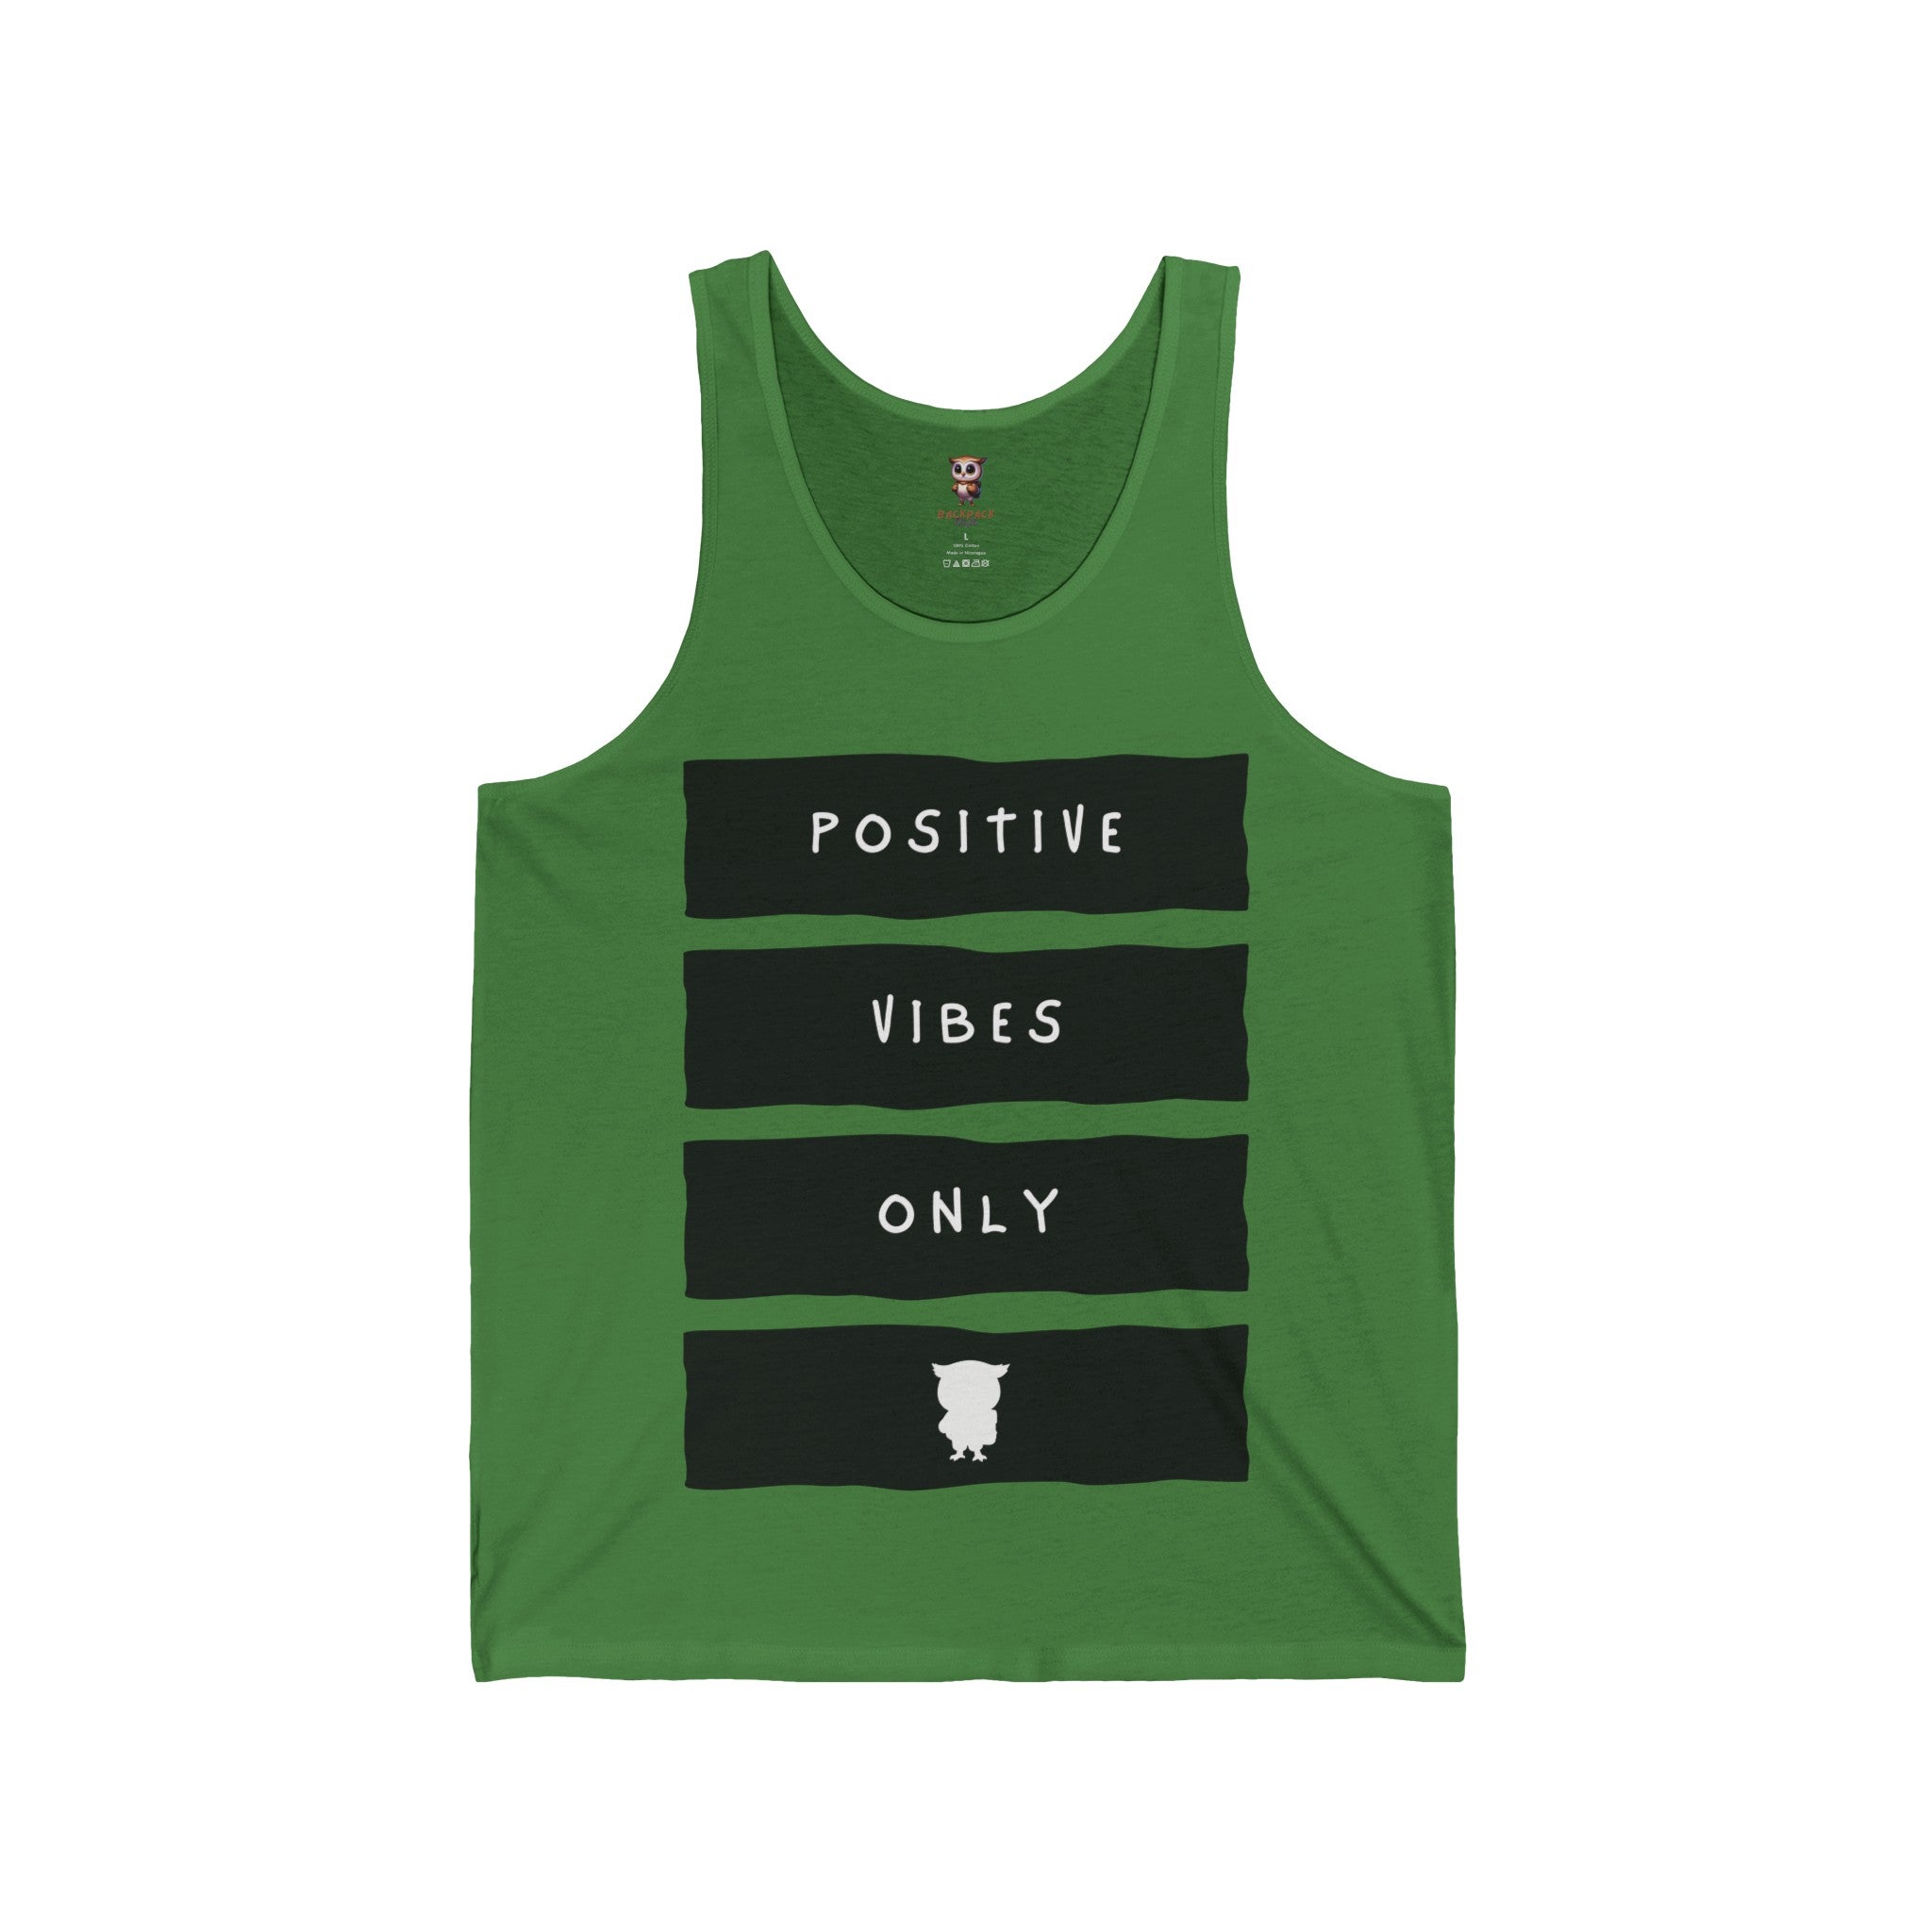 Positive Vibes Only - Unisex Jersey Tank